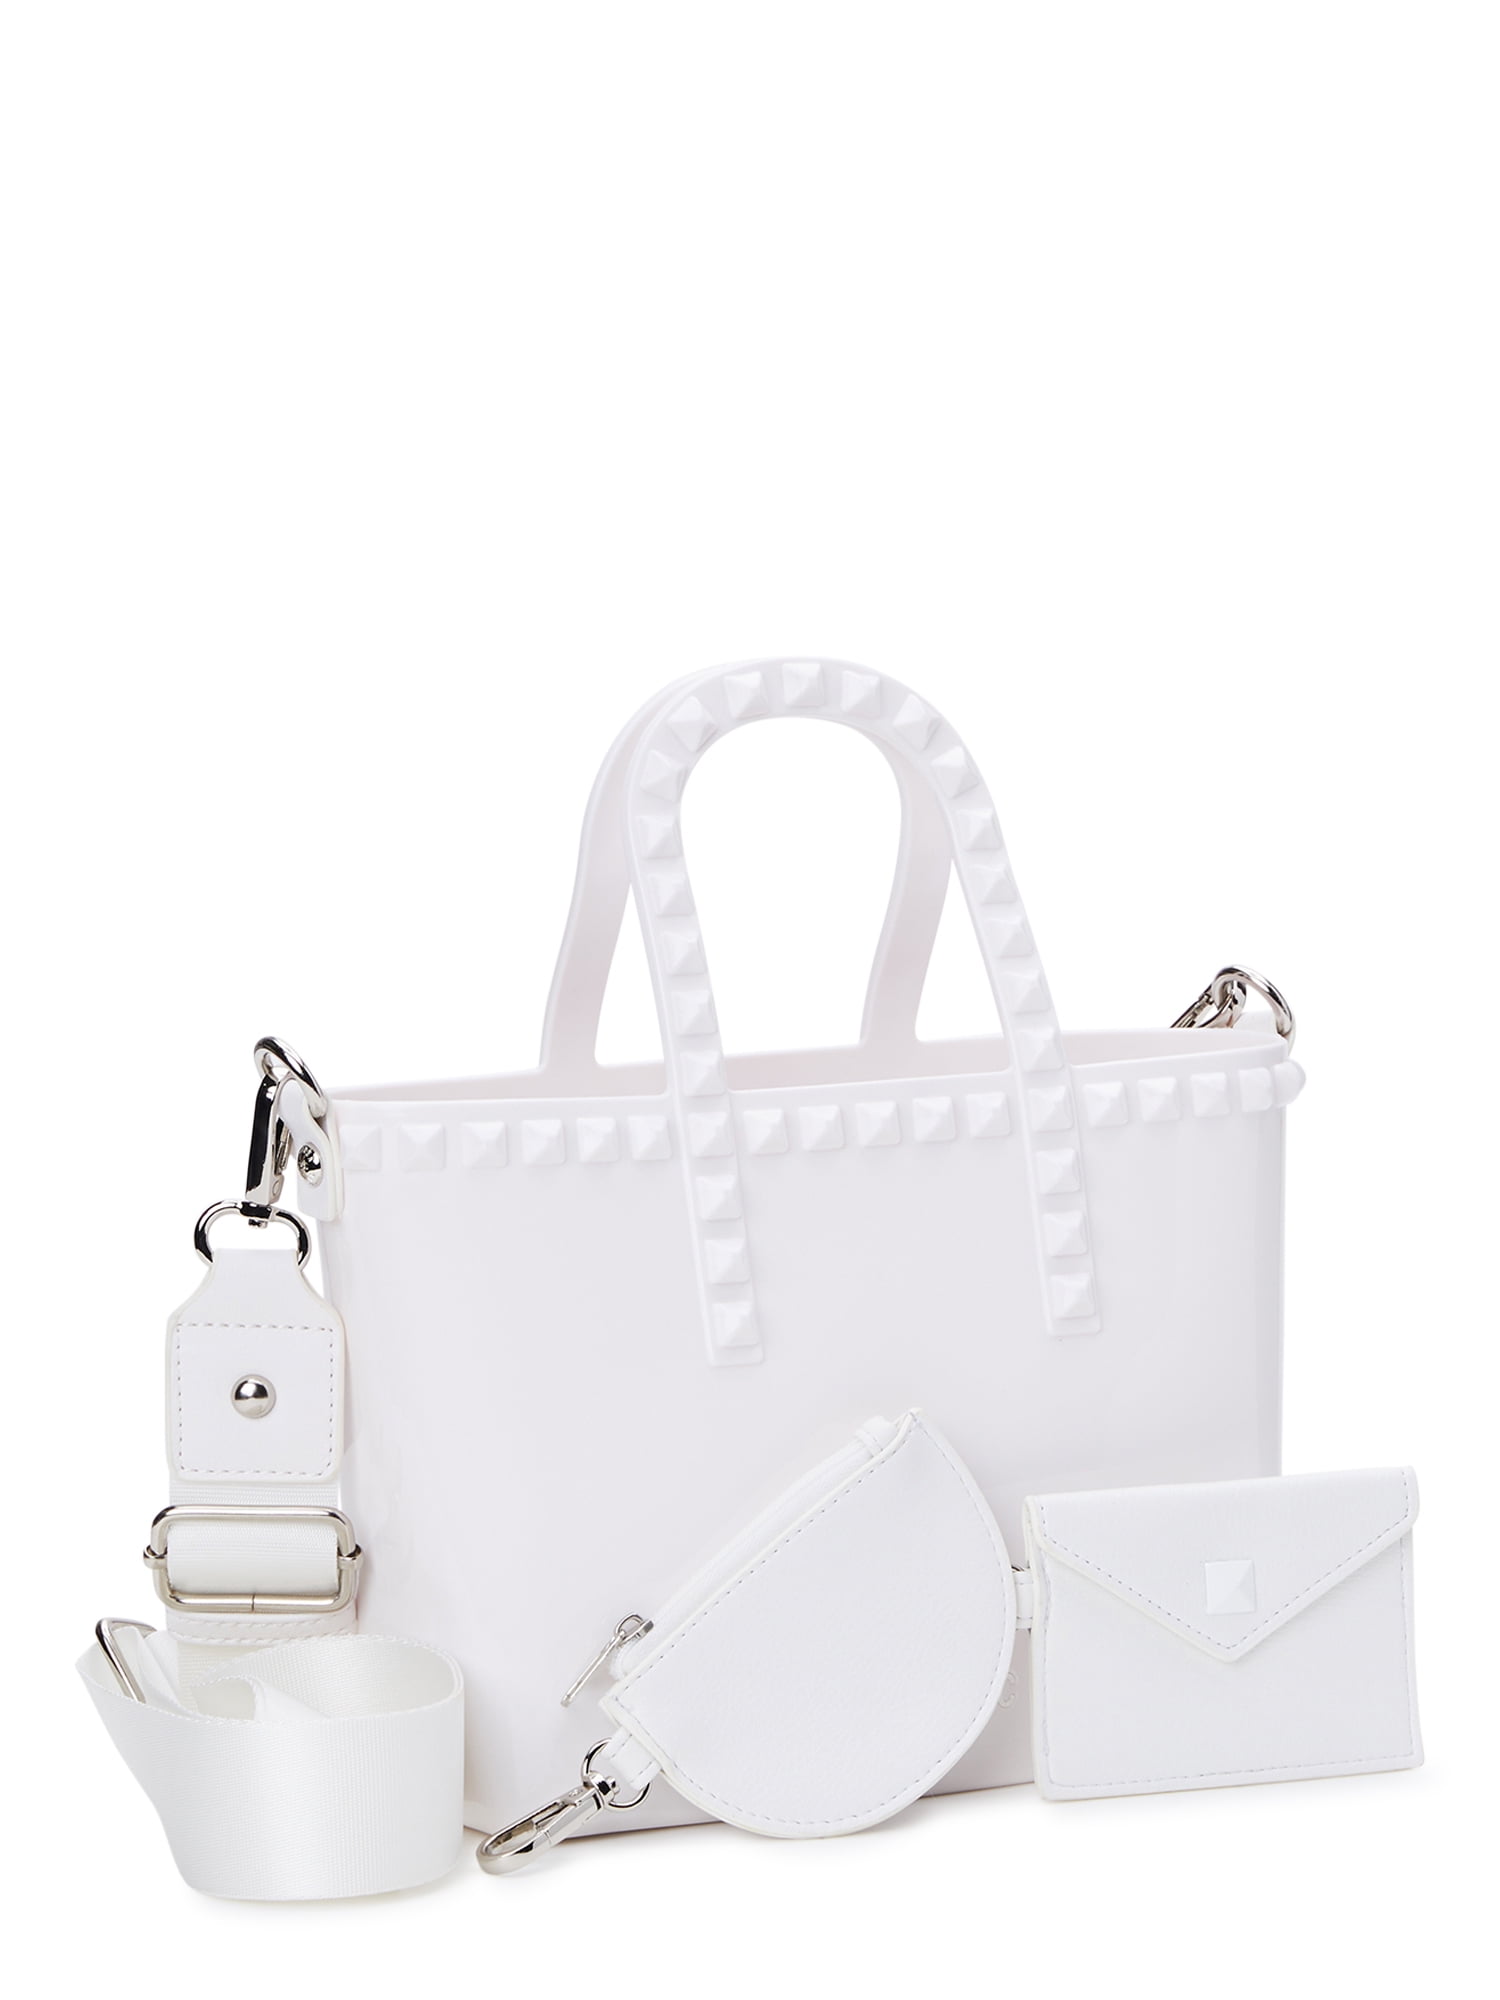 Madden NYC Women's Jelly Studded Mini Tote with Removable Pouch White